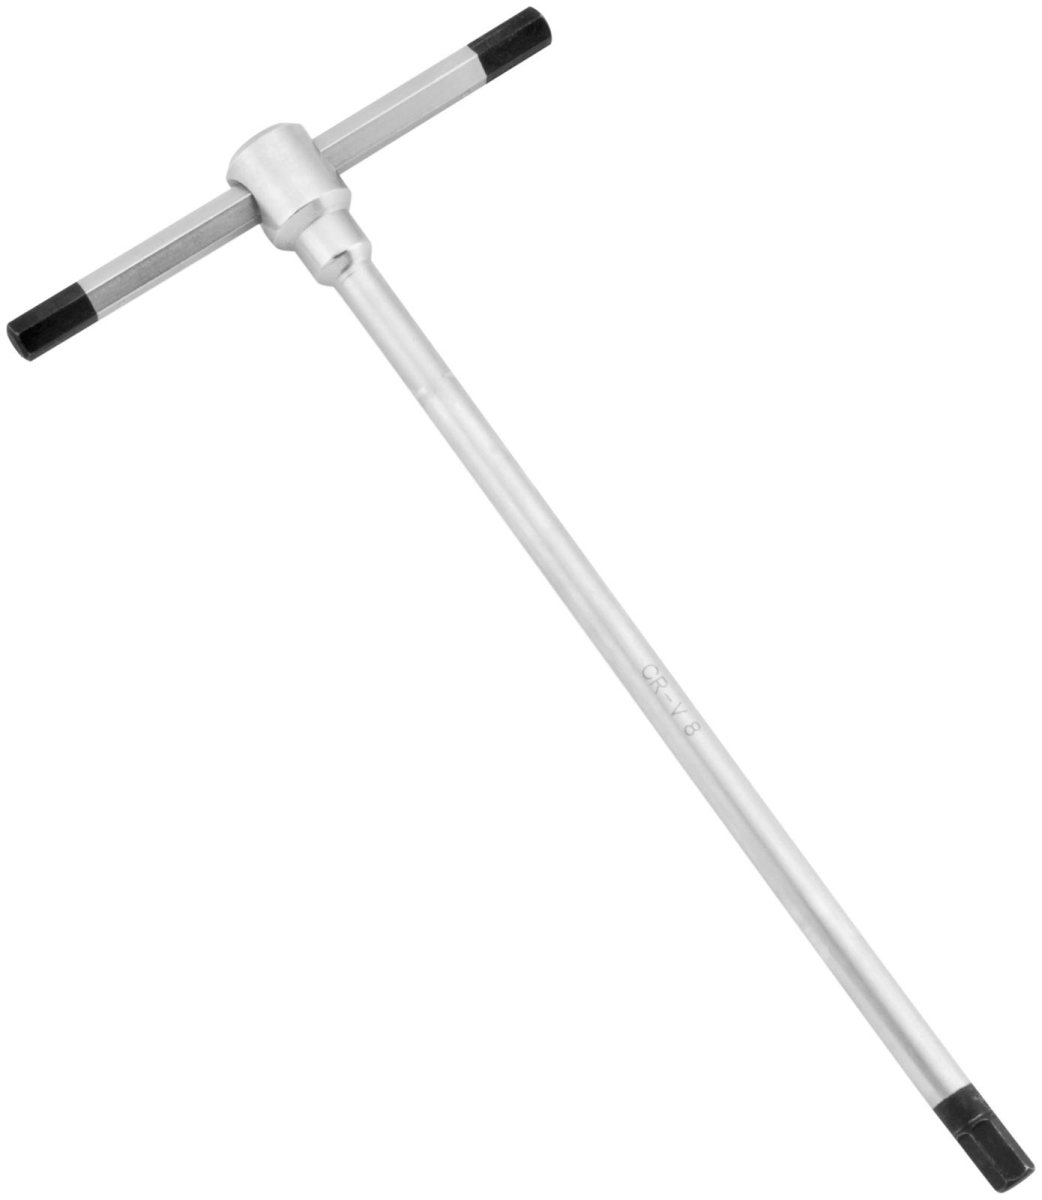 Picture of Bike Master 151868 8 mm T-Handle Allen Wrench